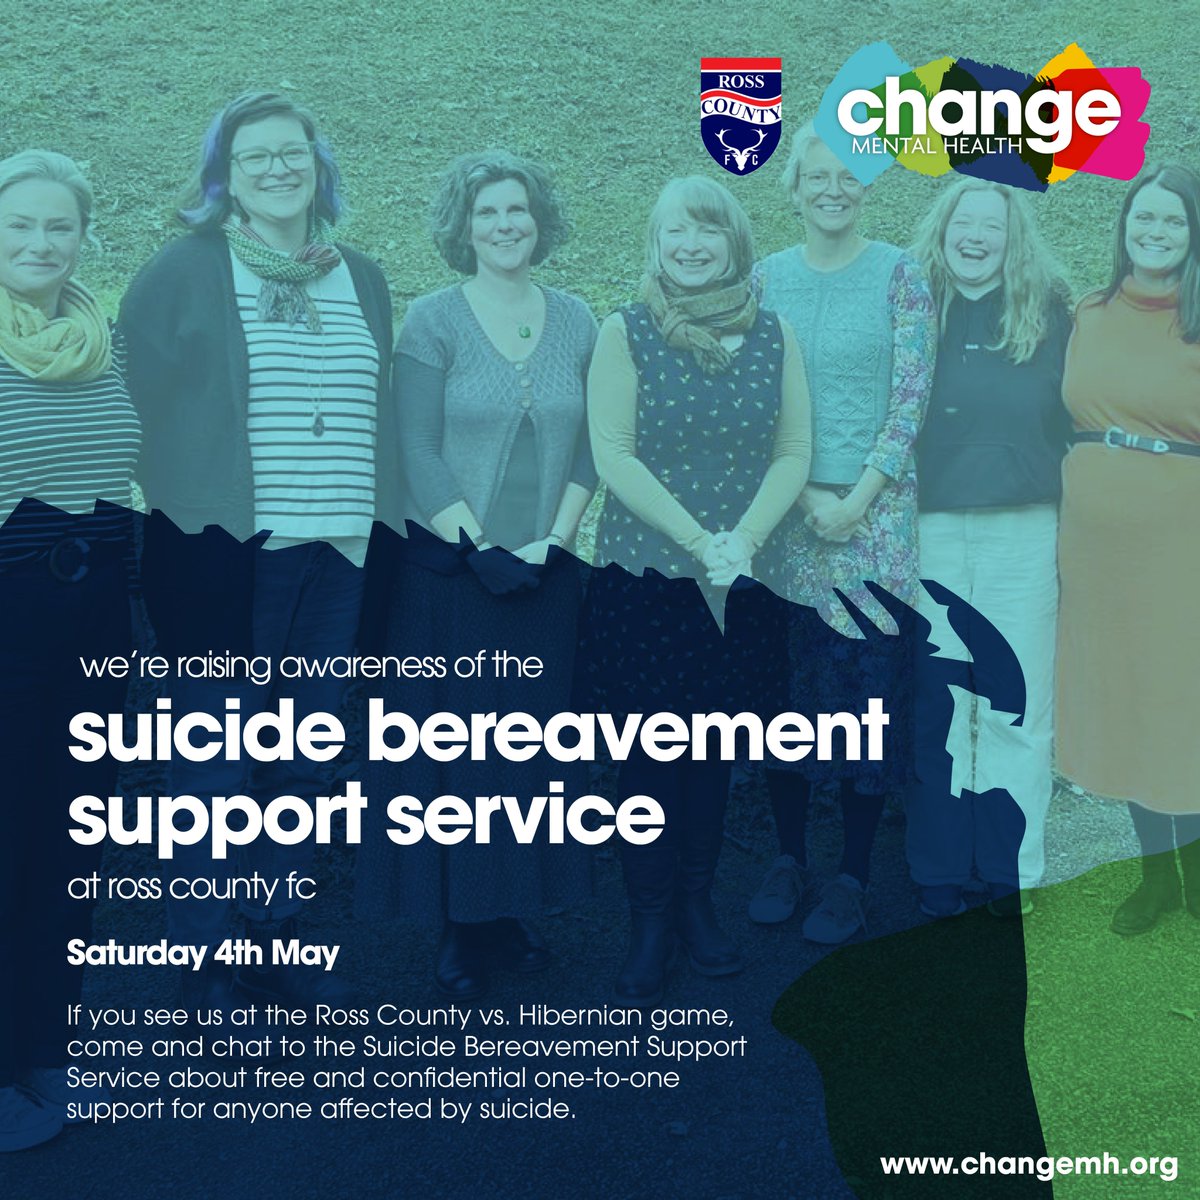 Going to @RossCounty's home game vs. @HibernianFC on Saturday? Speak to the Suicide Bereavement Support Service, who will be raising awareness of free, confidential one-to-one support for anyone affected by suicide in Highland and Argyll & Bute. 🔗 changemh.org/sbs